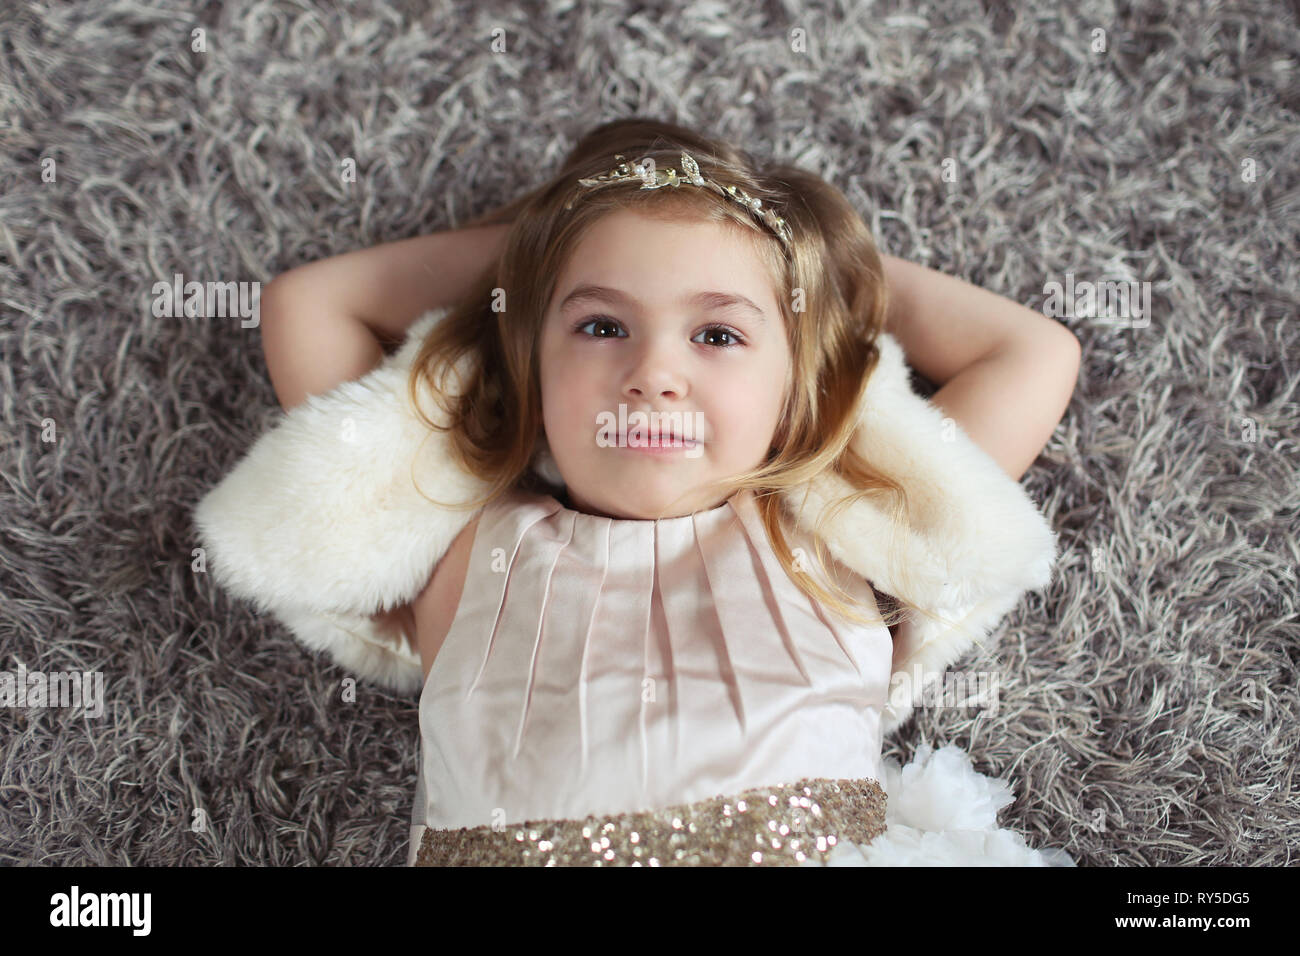 Little girl lay on floor and smile Stock Photo